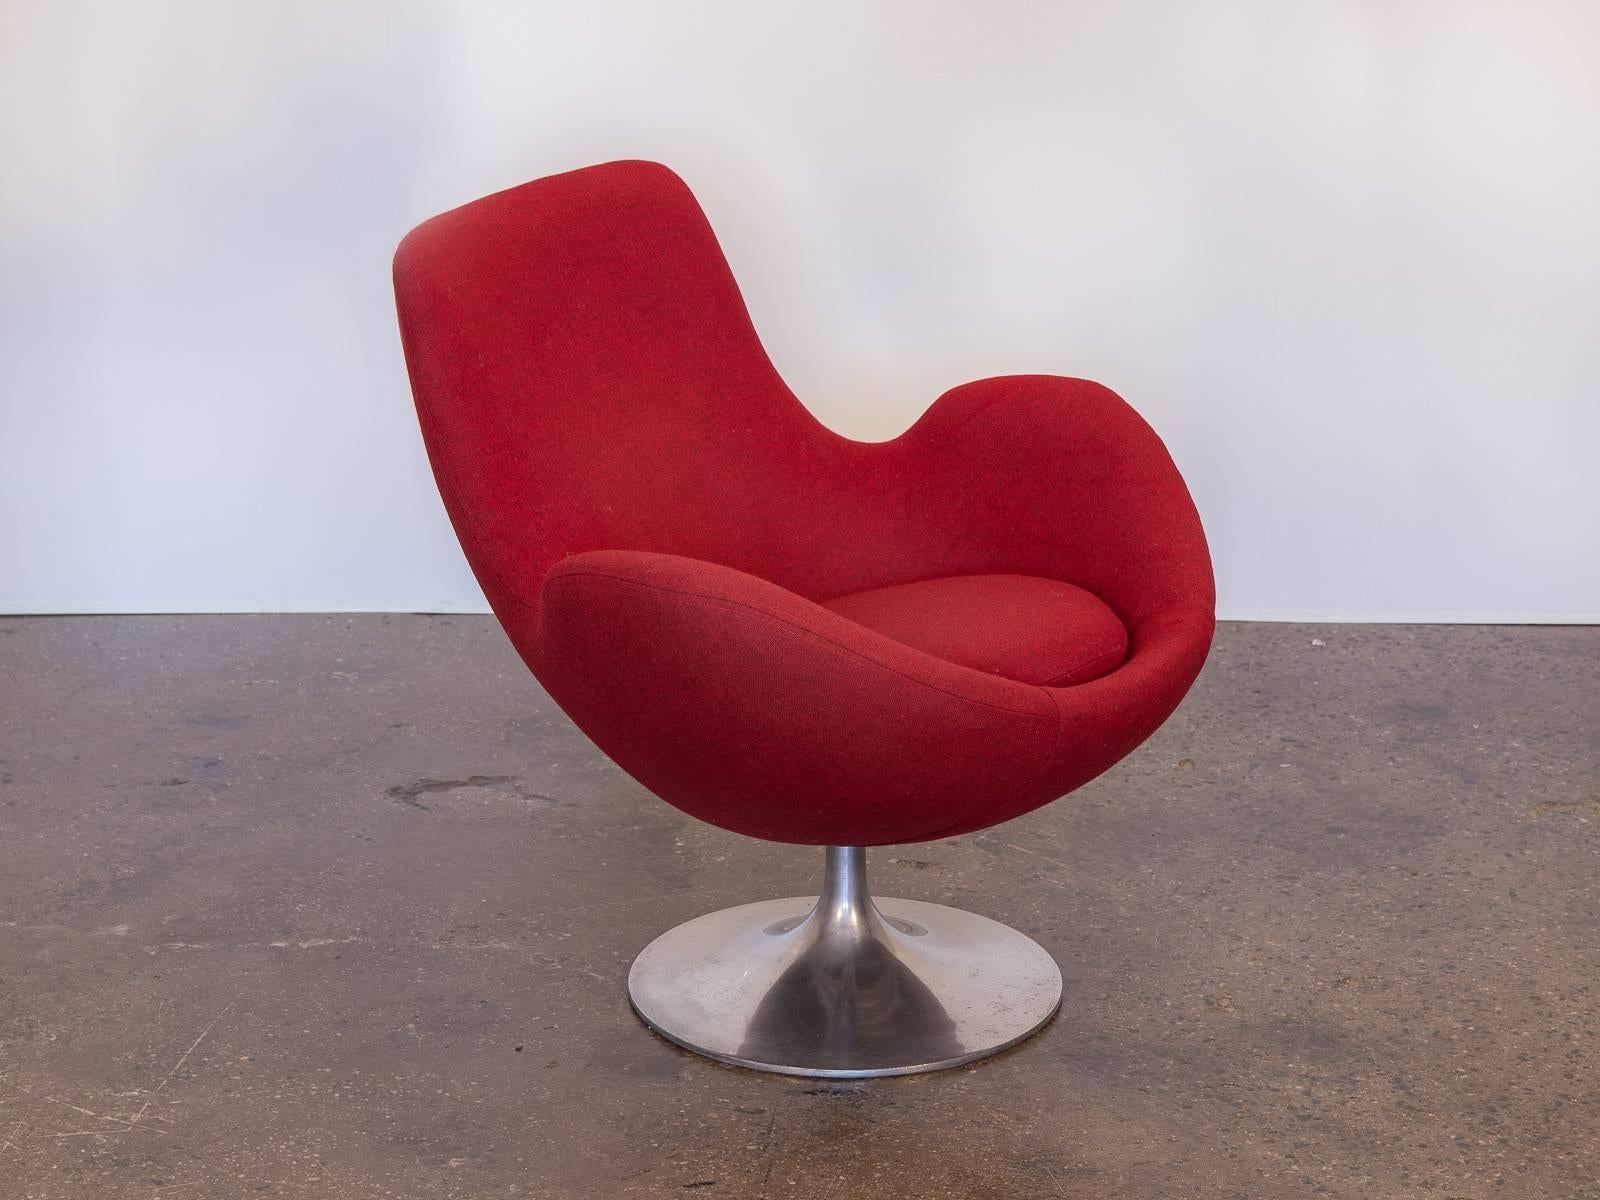 Scandinavian overman-style swivel chair. This stylish lounge chair has a sculpted tulip back that slopes into raised armrests. The body of the chair cradles like a pod for maximum comfort. Cushions are robust, and have been newly upholstered in a